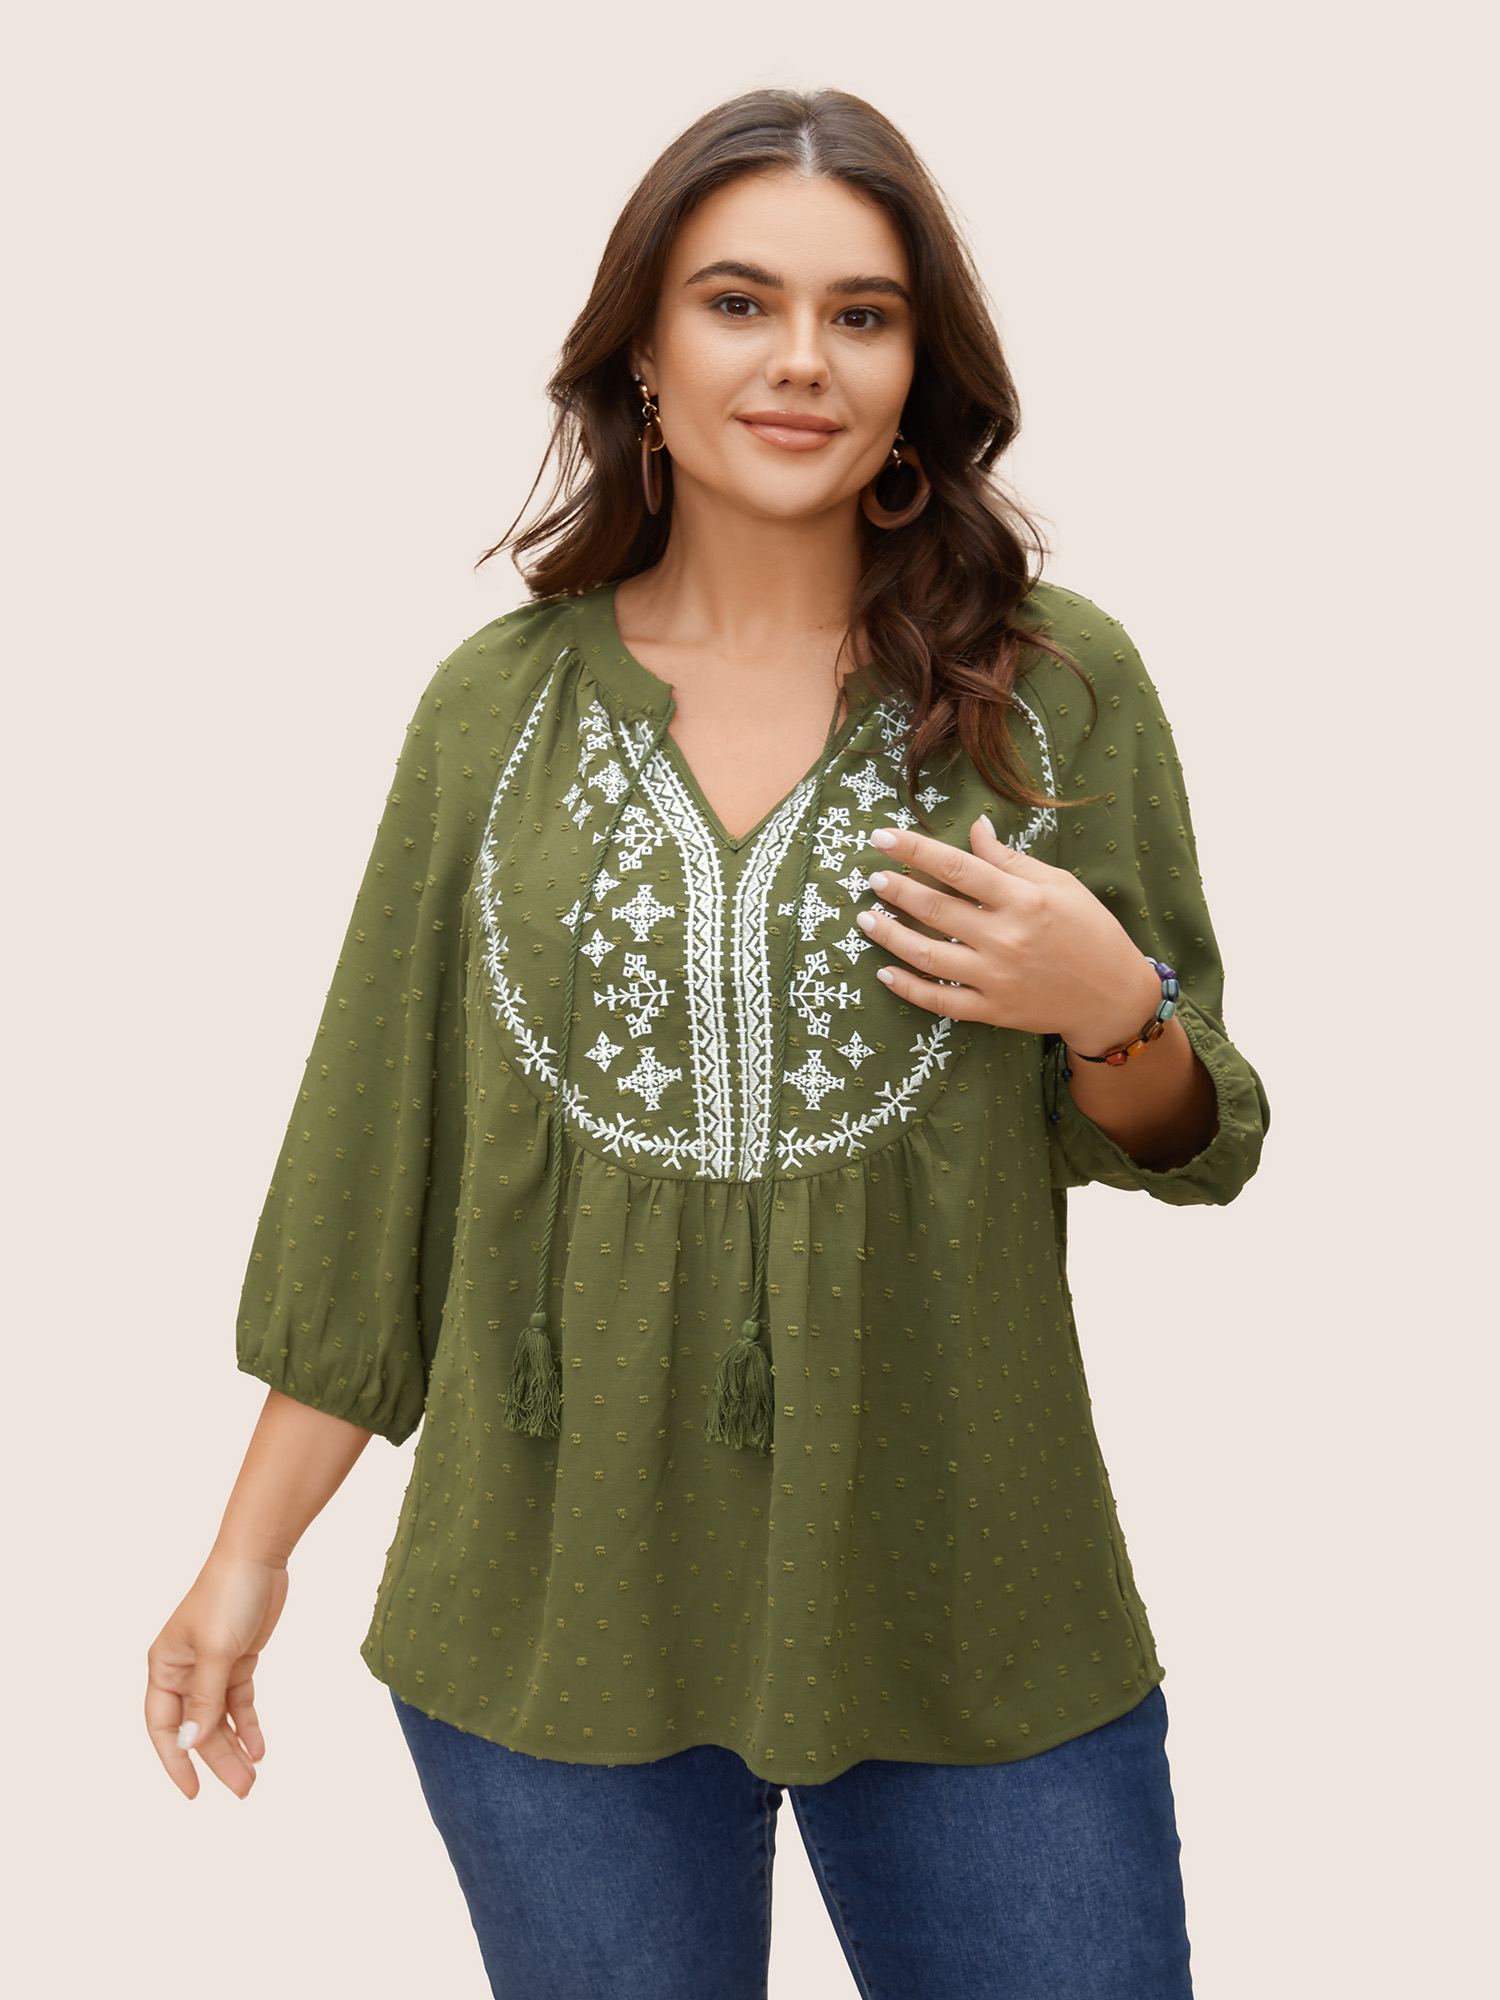 

Plus Size ArmyGreen Embroidered Tie Knot Tassels Lantern Sleeve T-shirt Women Resort Elbow-length sleeve V-neck Vacation Blouses BloomChic